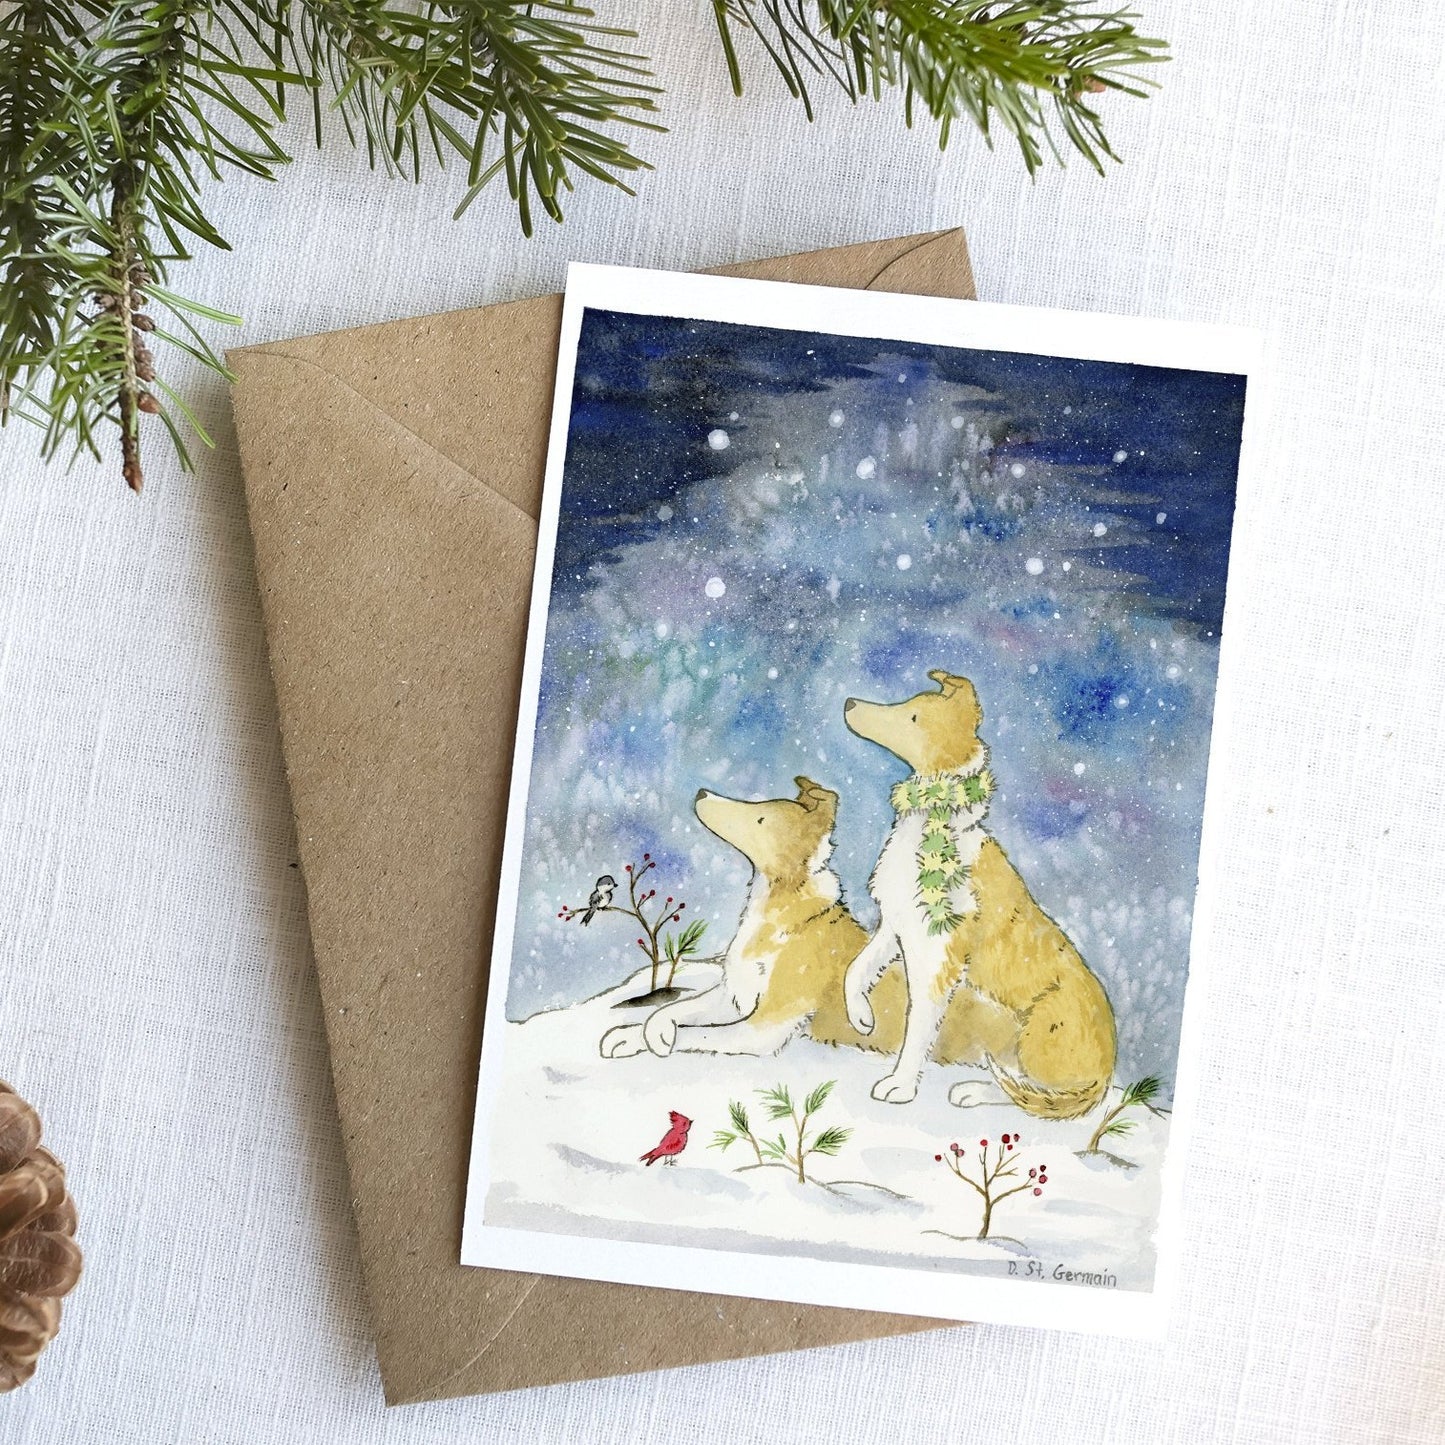 Collie Christmas Card, Smooth Collie Holiday Card, Dog Lover Card, Gift for Collie Lovers, Blank Cards, Pack of Greeting Cards, Cute Dogs